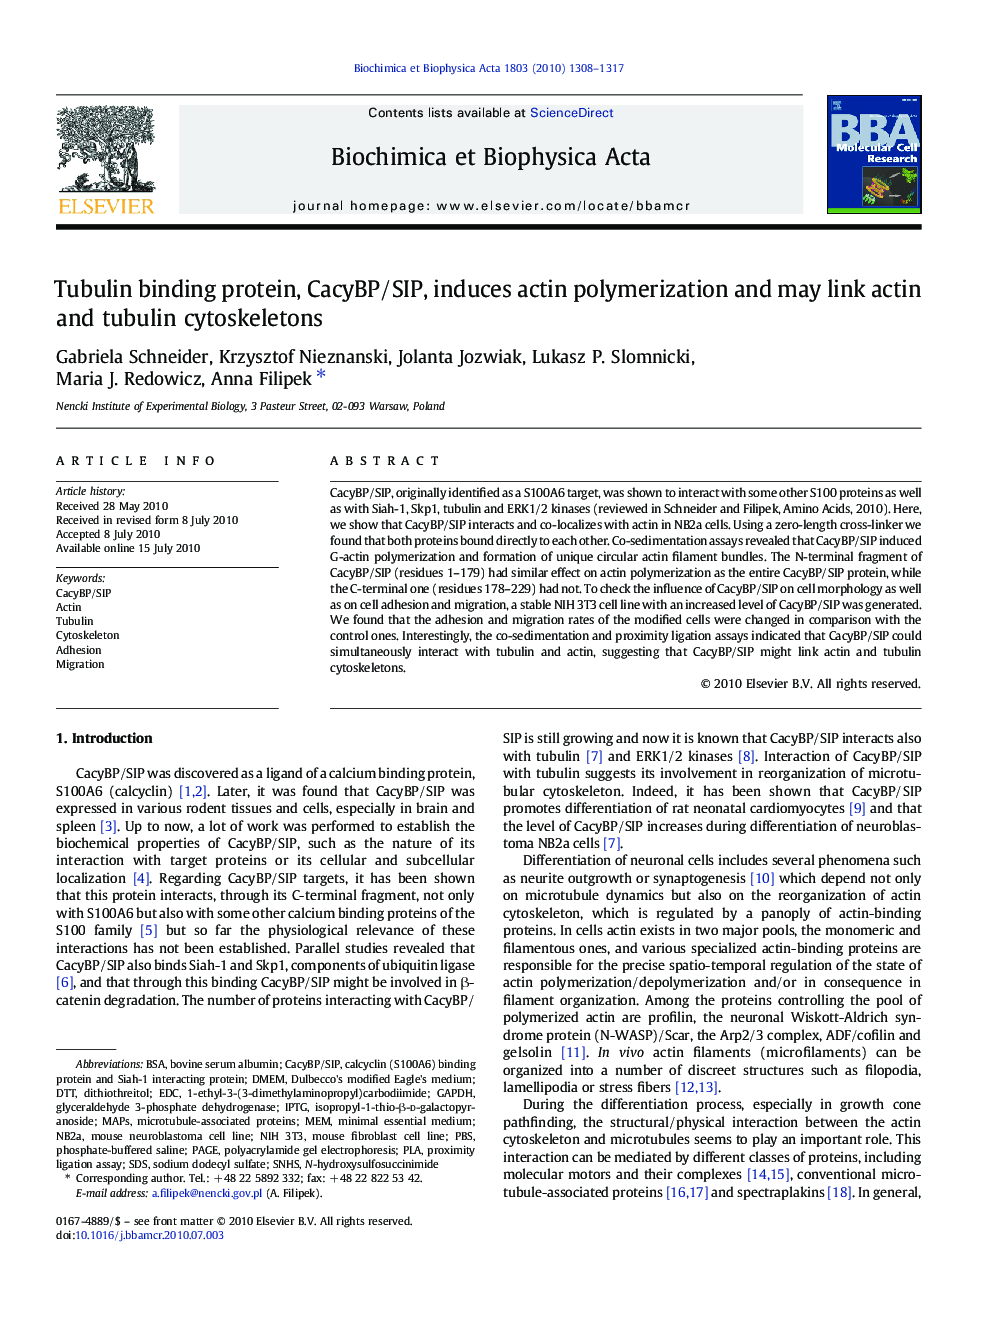 Tubulin binding protein, CacyBP/SIP, induces actin polymerization and may link actin and tubulin cytoskeletons